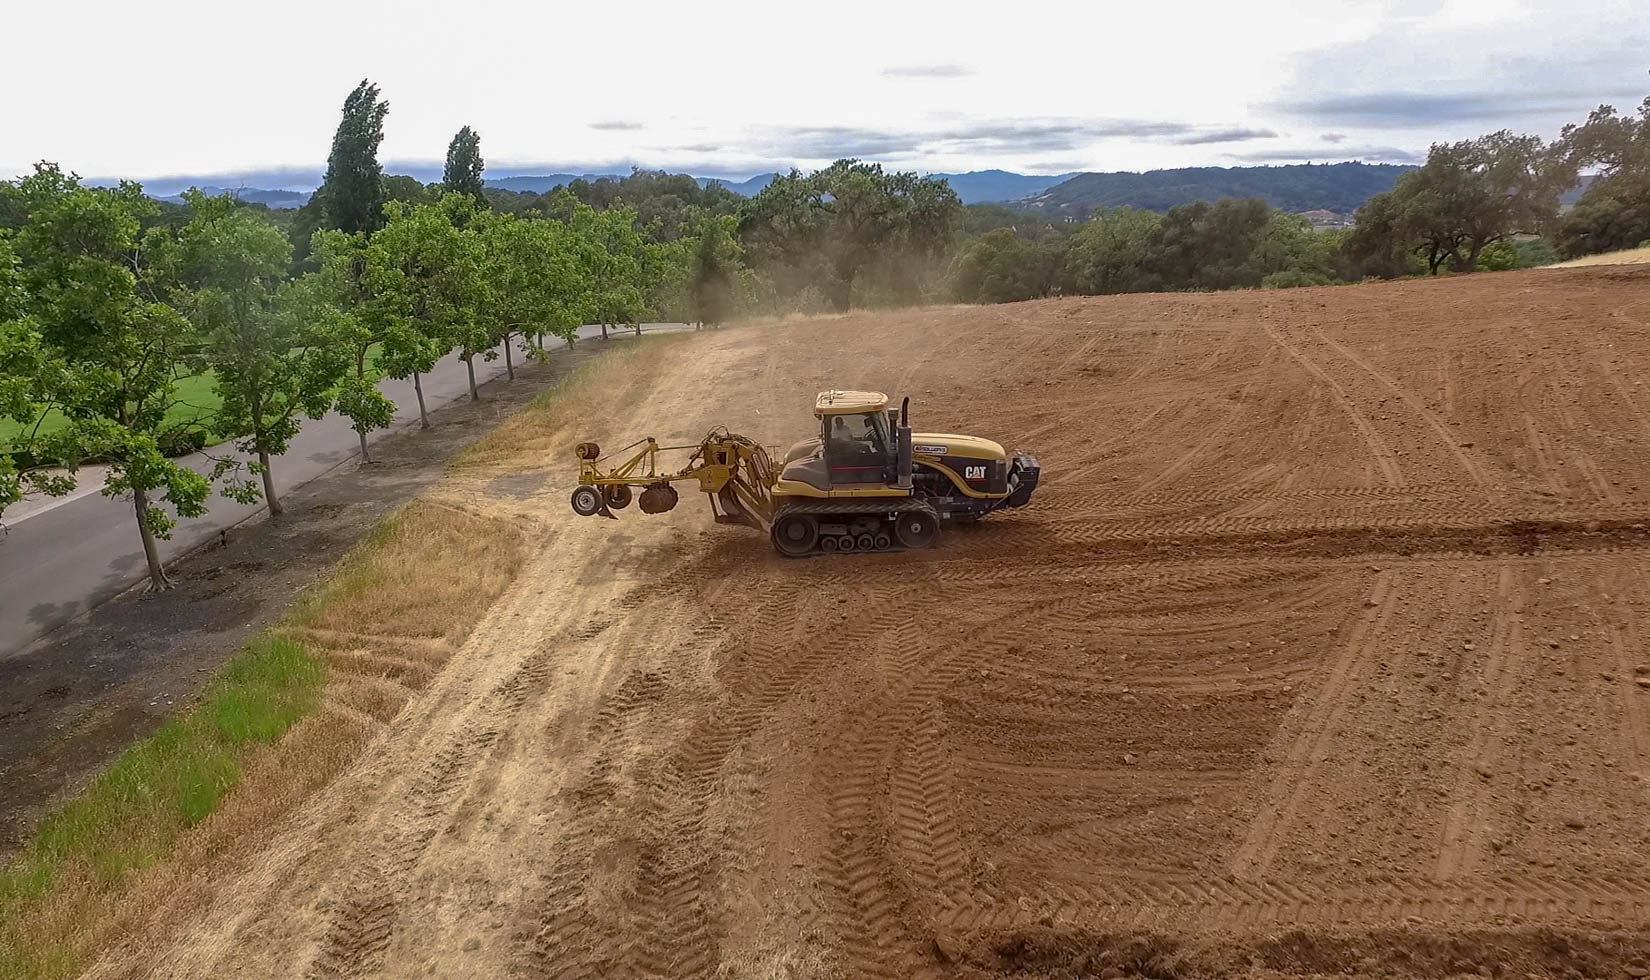 Yellow vineyard soil deep ripping tractor in a freshly tilled dirt field. Trees line the street on the left.